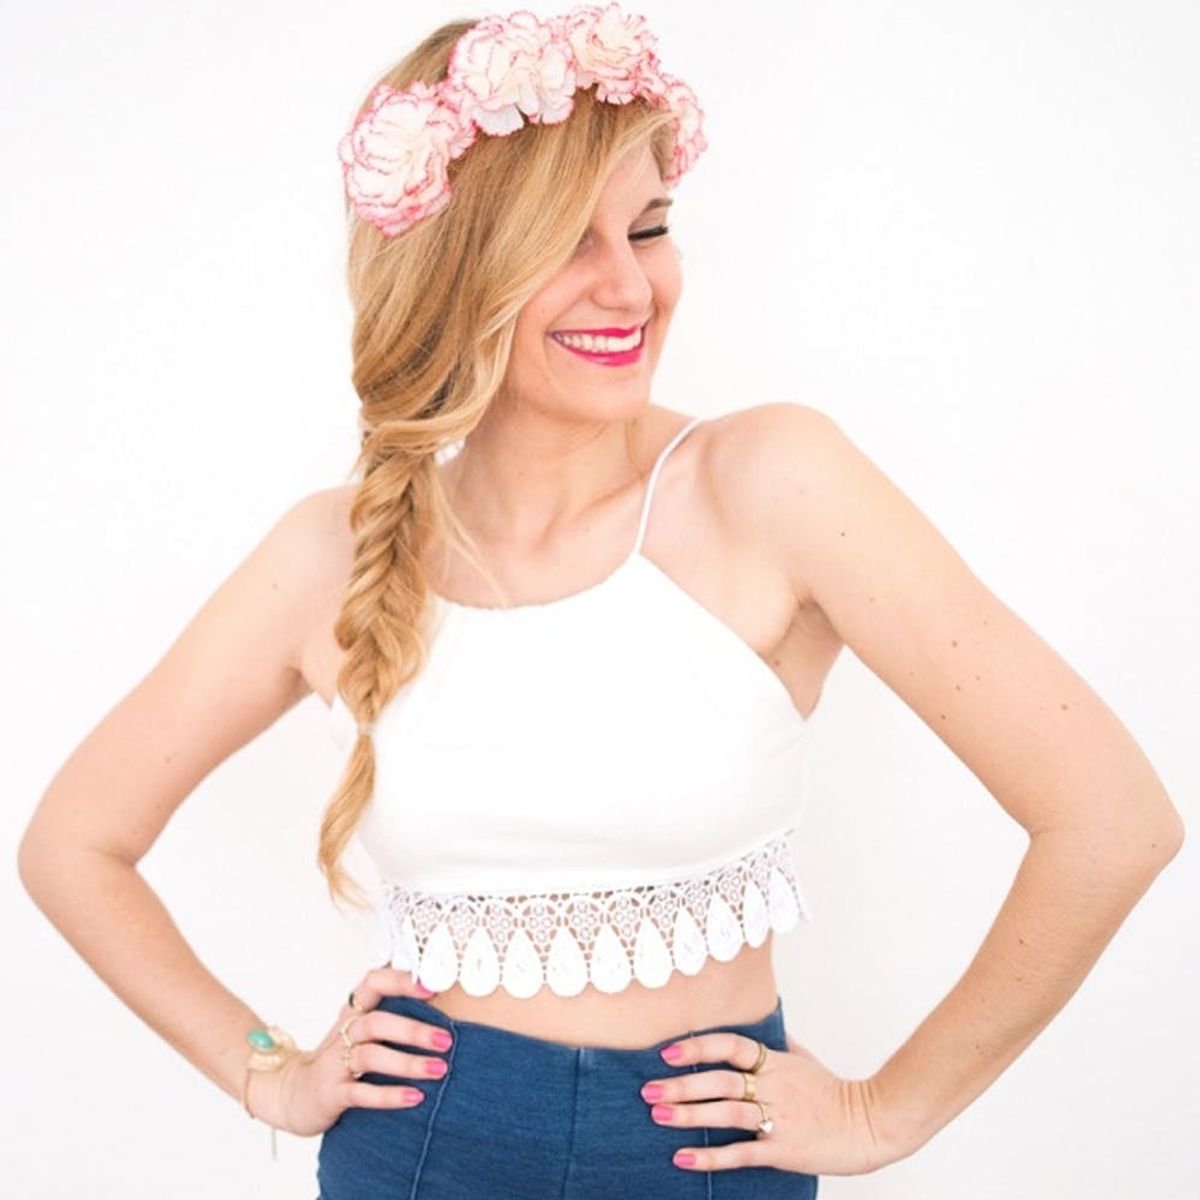 DIY This Easy Crop Top and Get Ready for Coachella